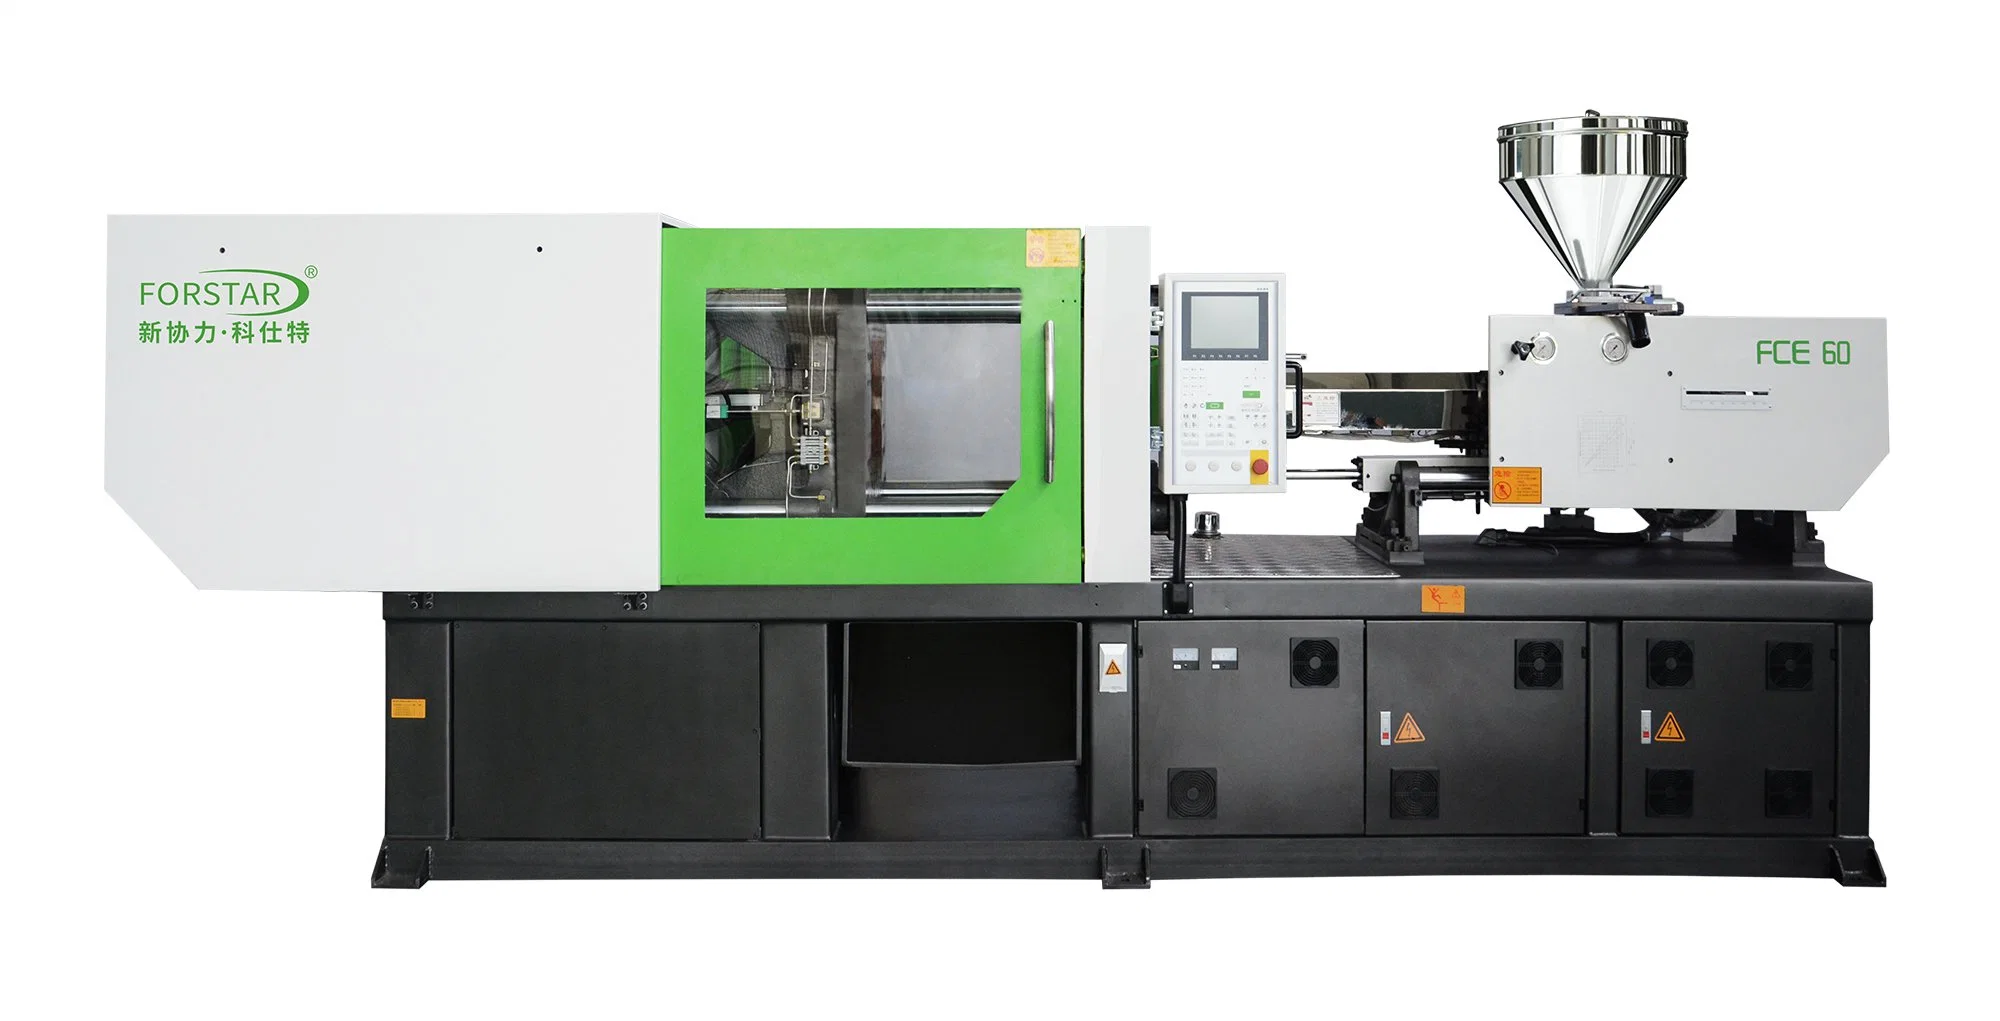 ALL NEW FC160S FORSTAR INJECTION MOLDING MACHINE,PLASTIC PRODUCT MAKING MACHINE,MAKING CAP,MOBILE PHONE SHELL OR HANDLE;WITH SERVO SYSTEM,MORE ENERGY SAVING